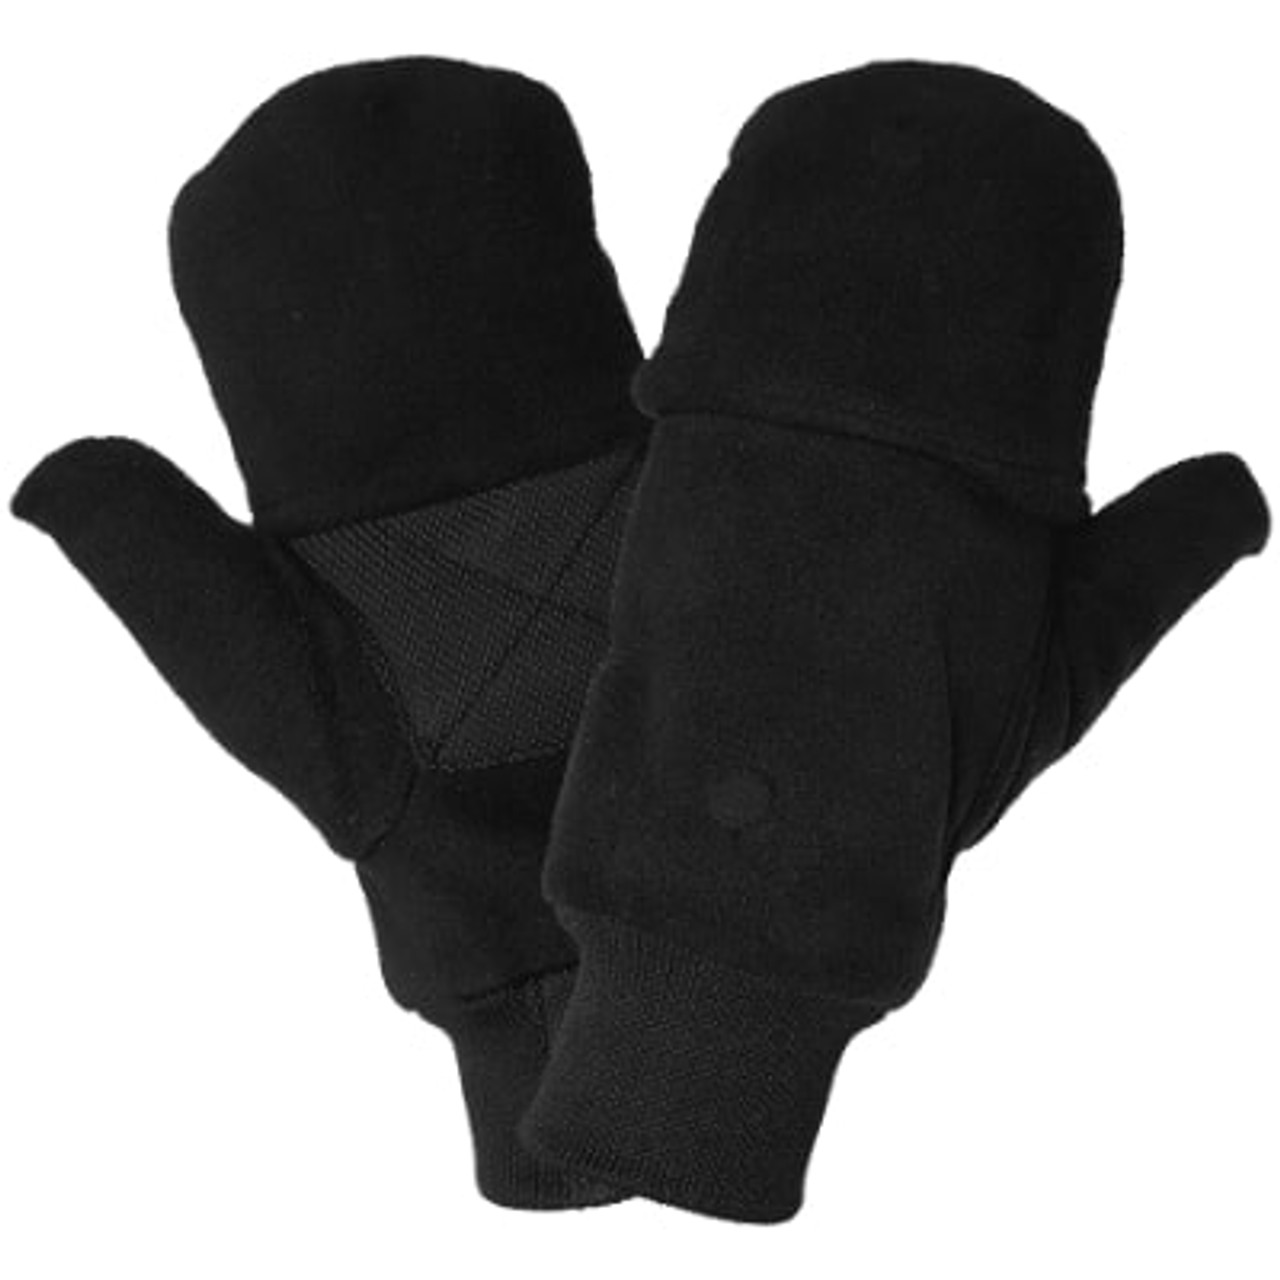 Extremus Ice Fishing Gloves, Convertible Mittens, Warm Winter Gloves - Cold  Weather Fishing Gloves - 3M Thinsulate Winter Fingerless Mittens for Men  and Women